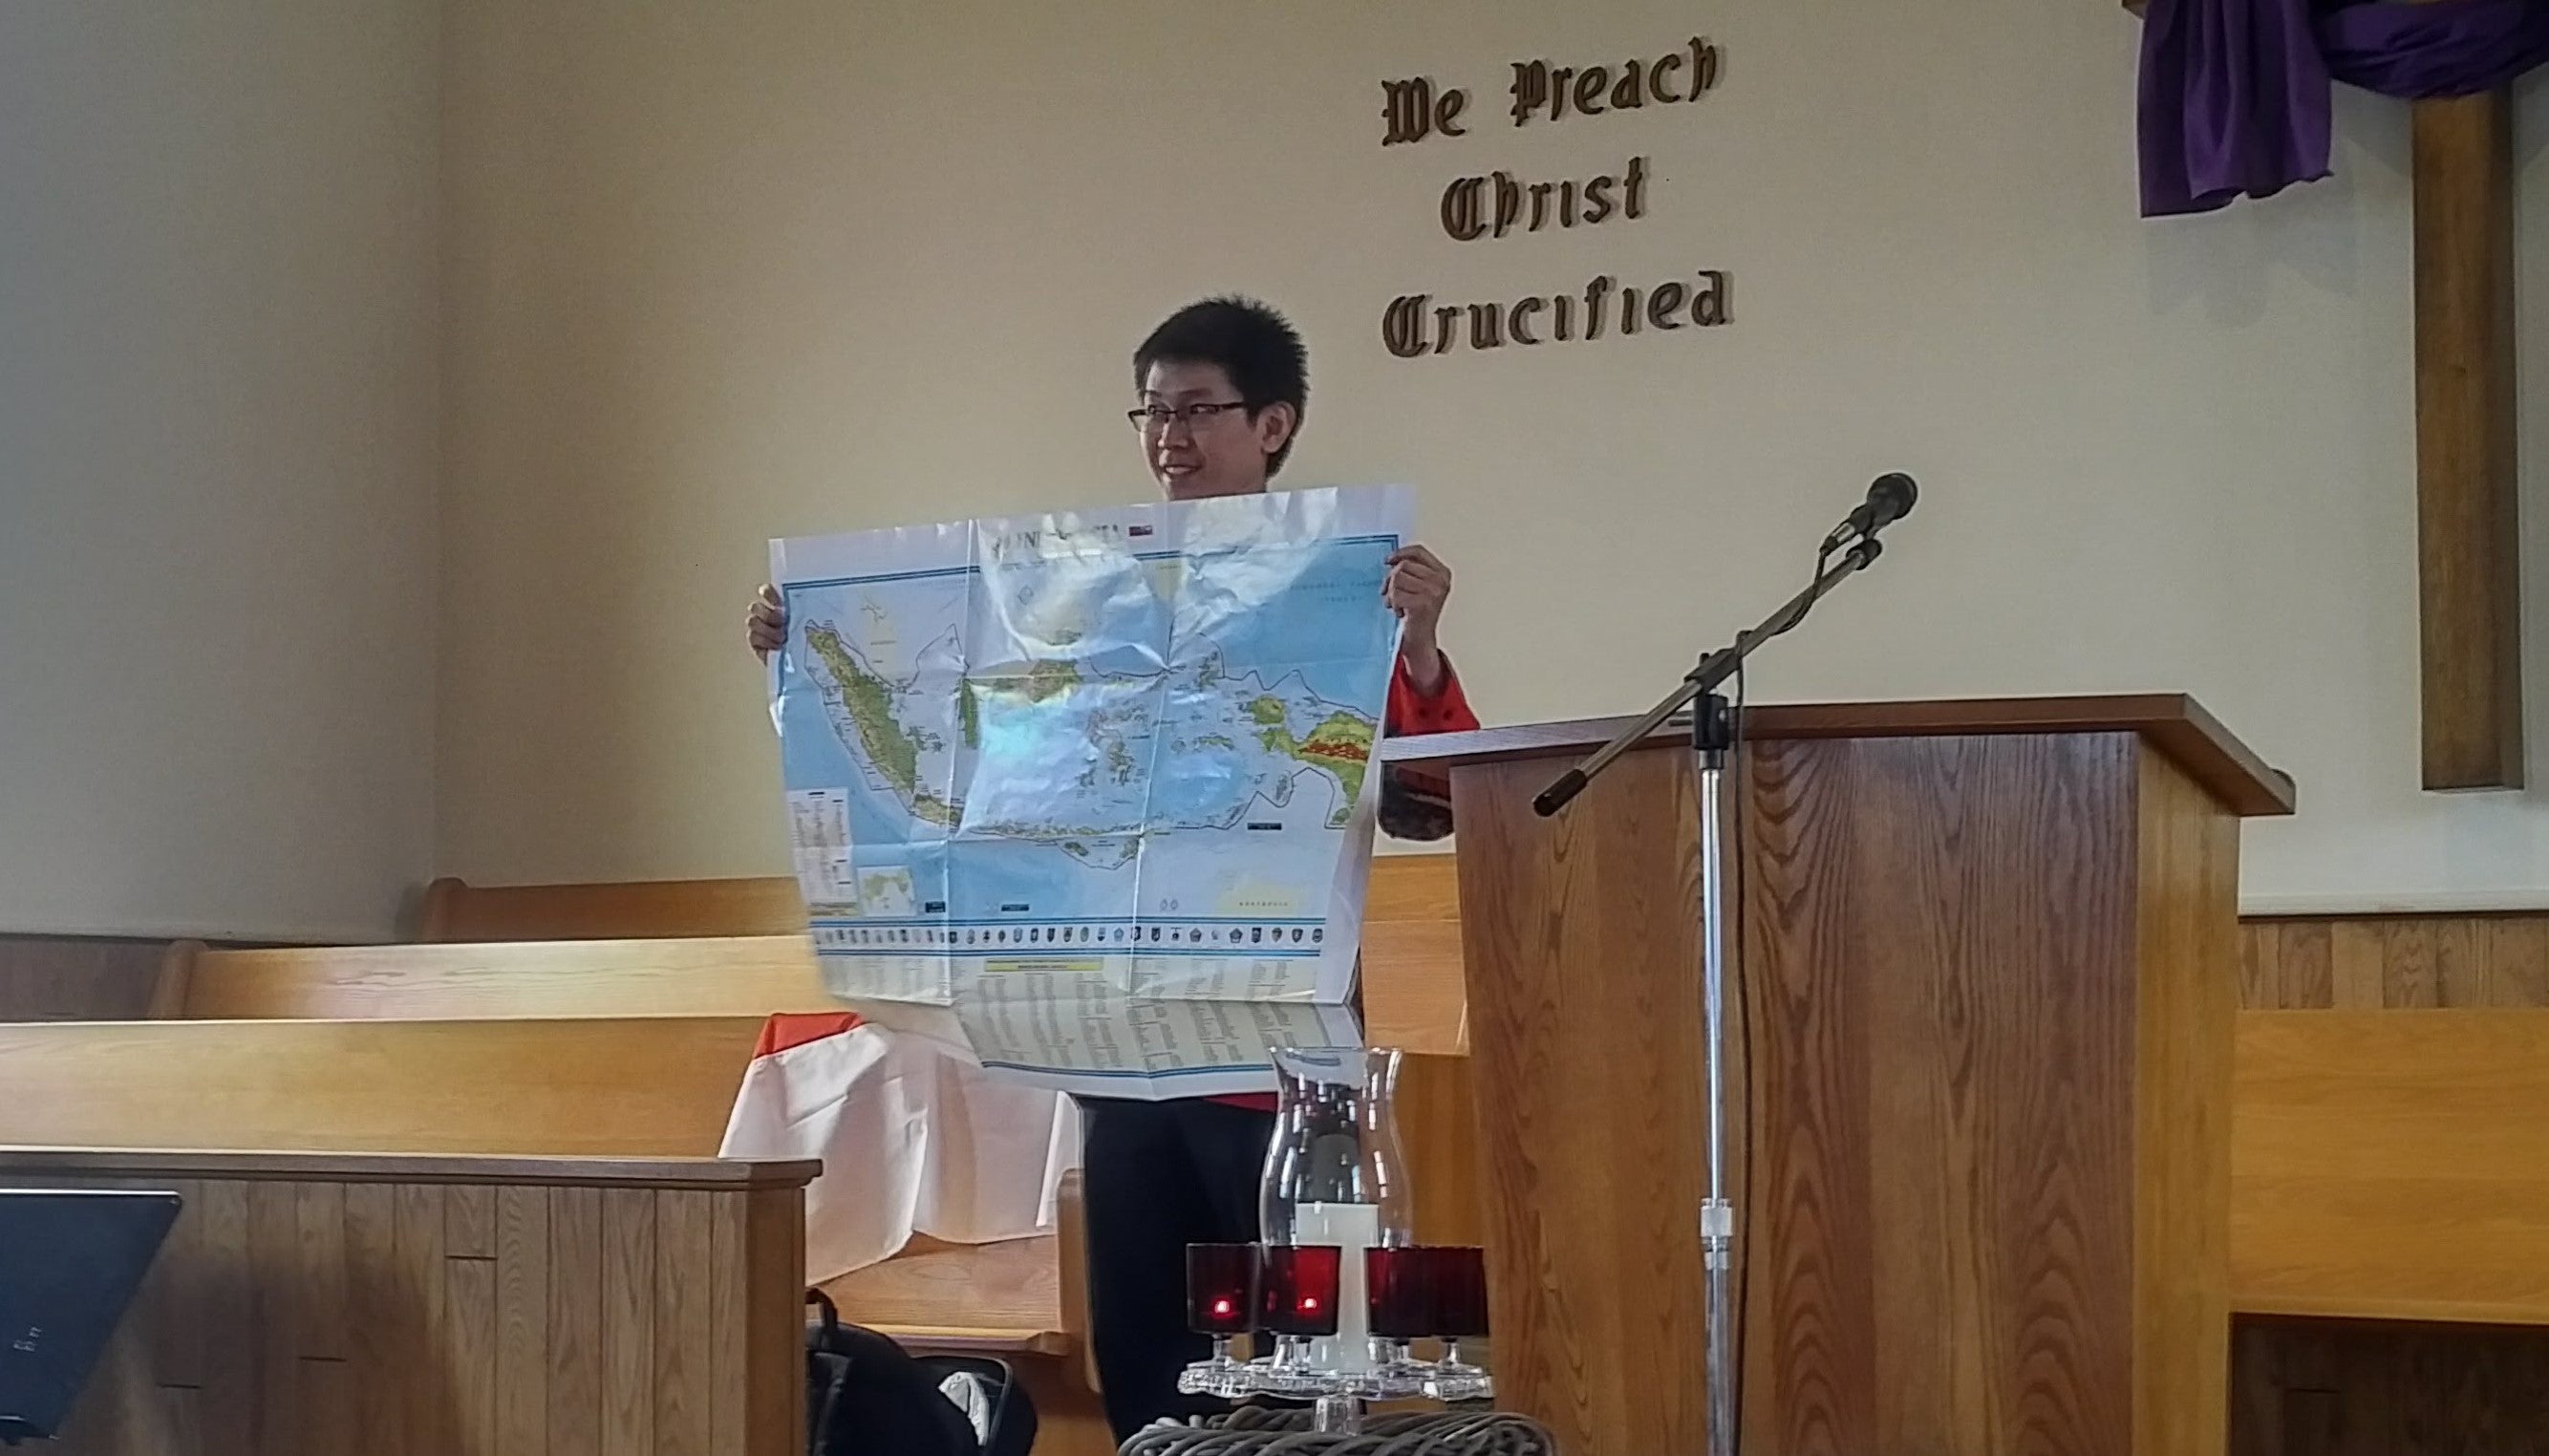 Lorenzo Fellycyano standing with a map in front of a church congregation